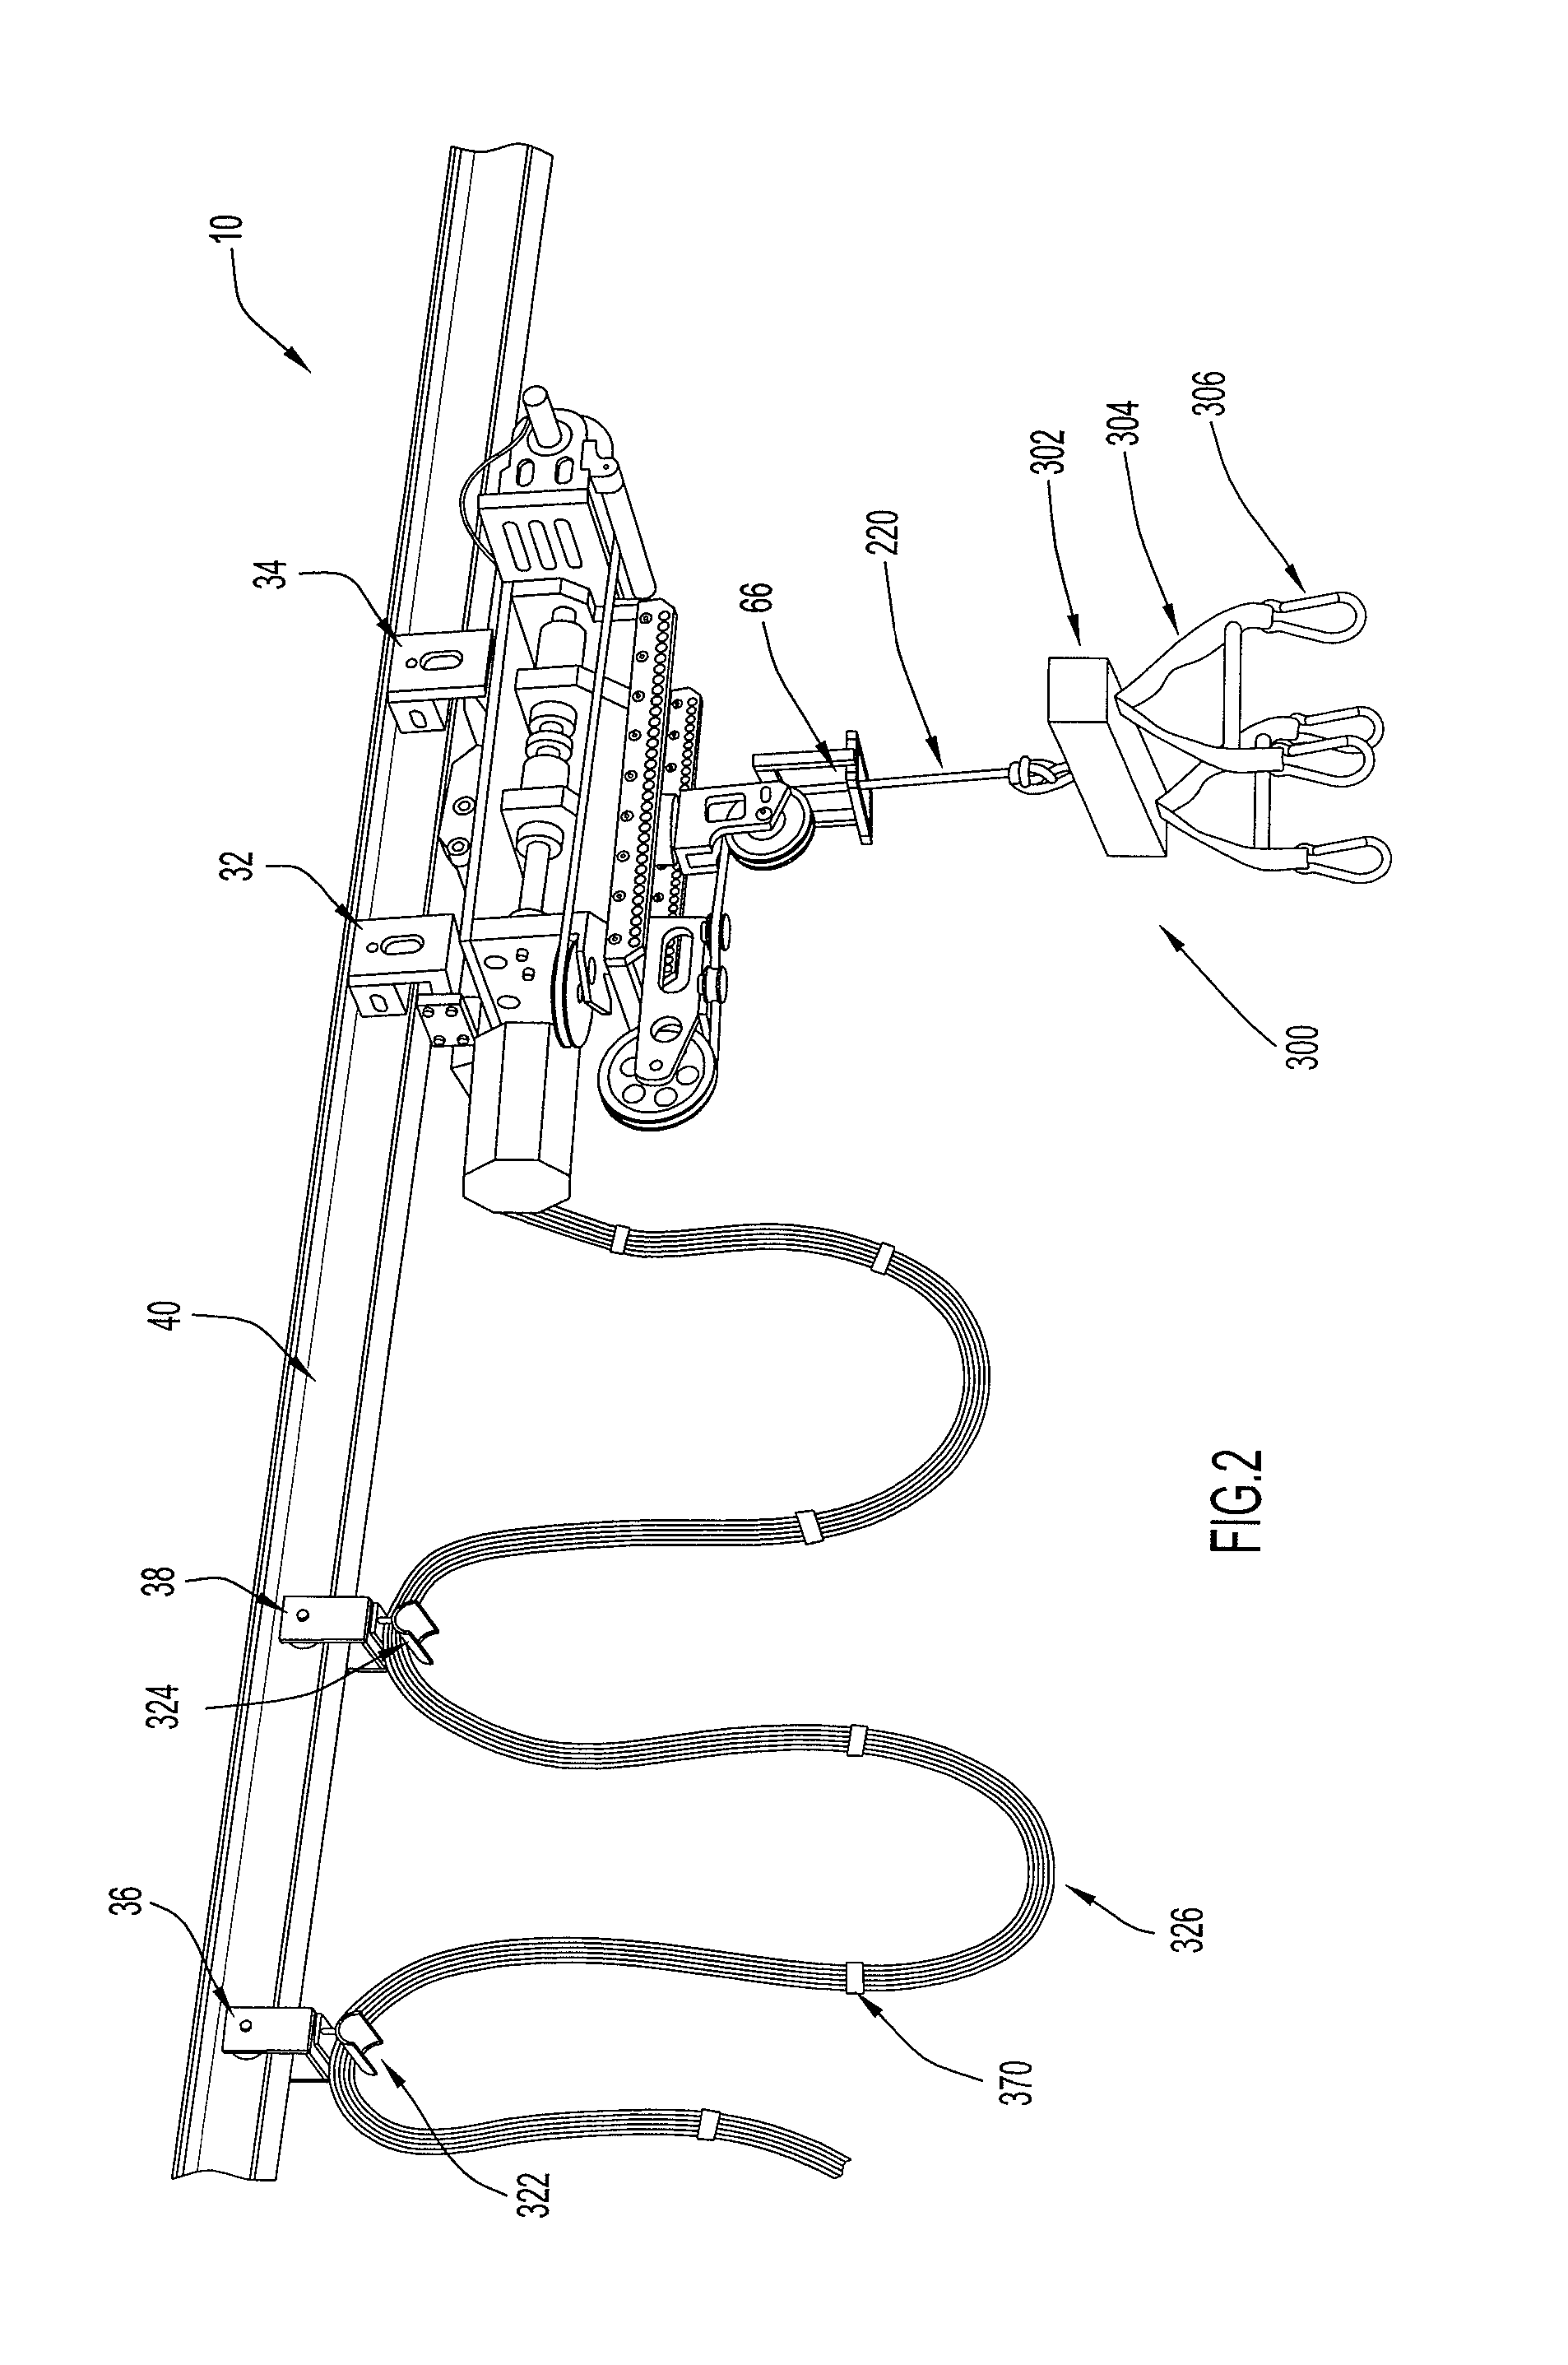 Body weight support system and method of using the same